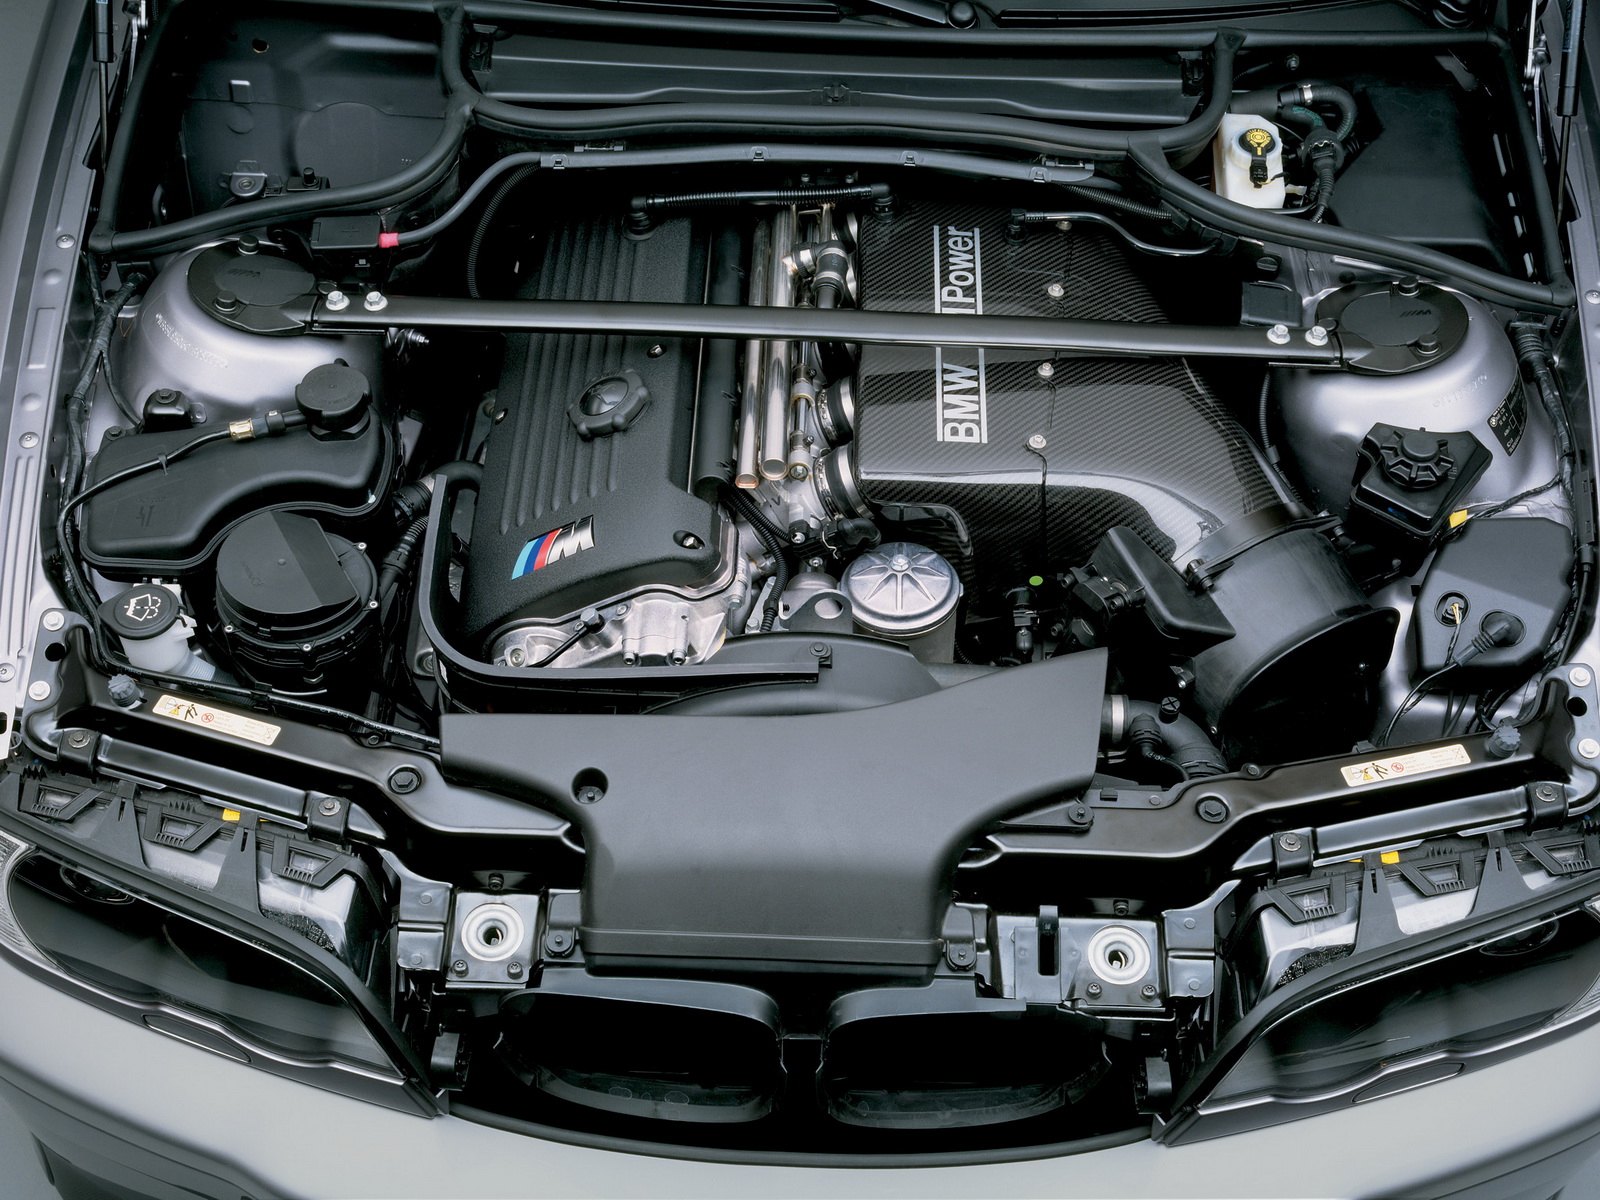 Top 5 Engines On The BMW Series Over The Years | Carscoops